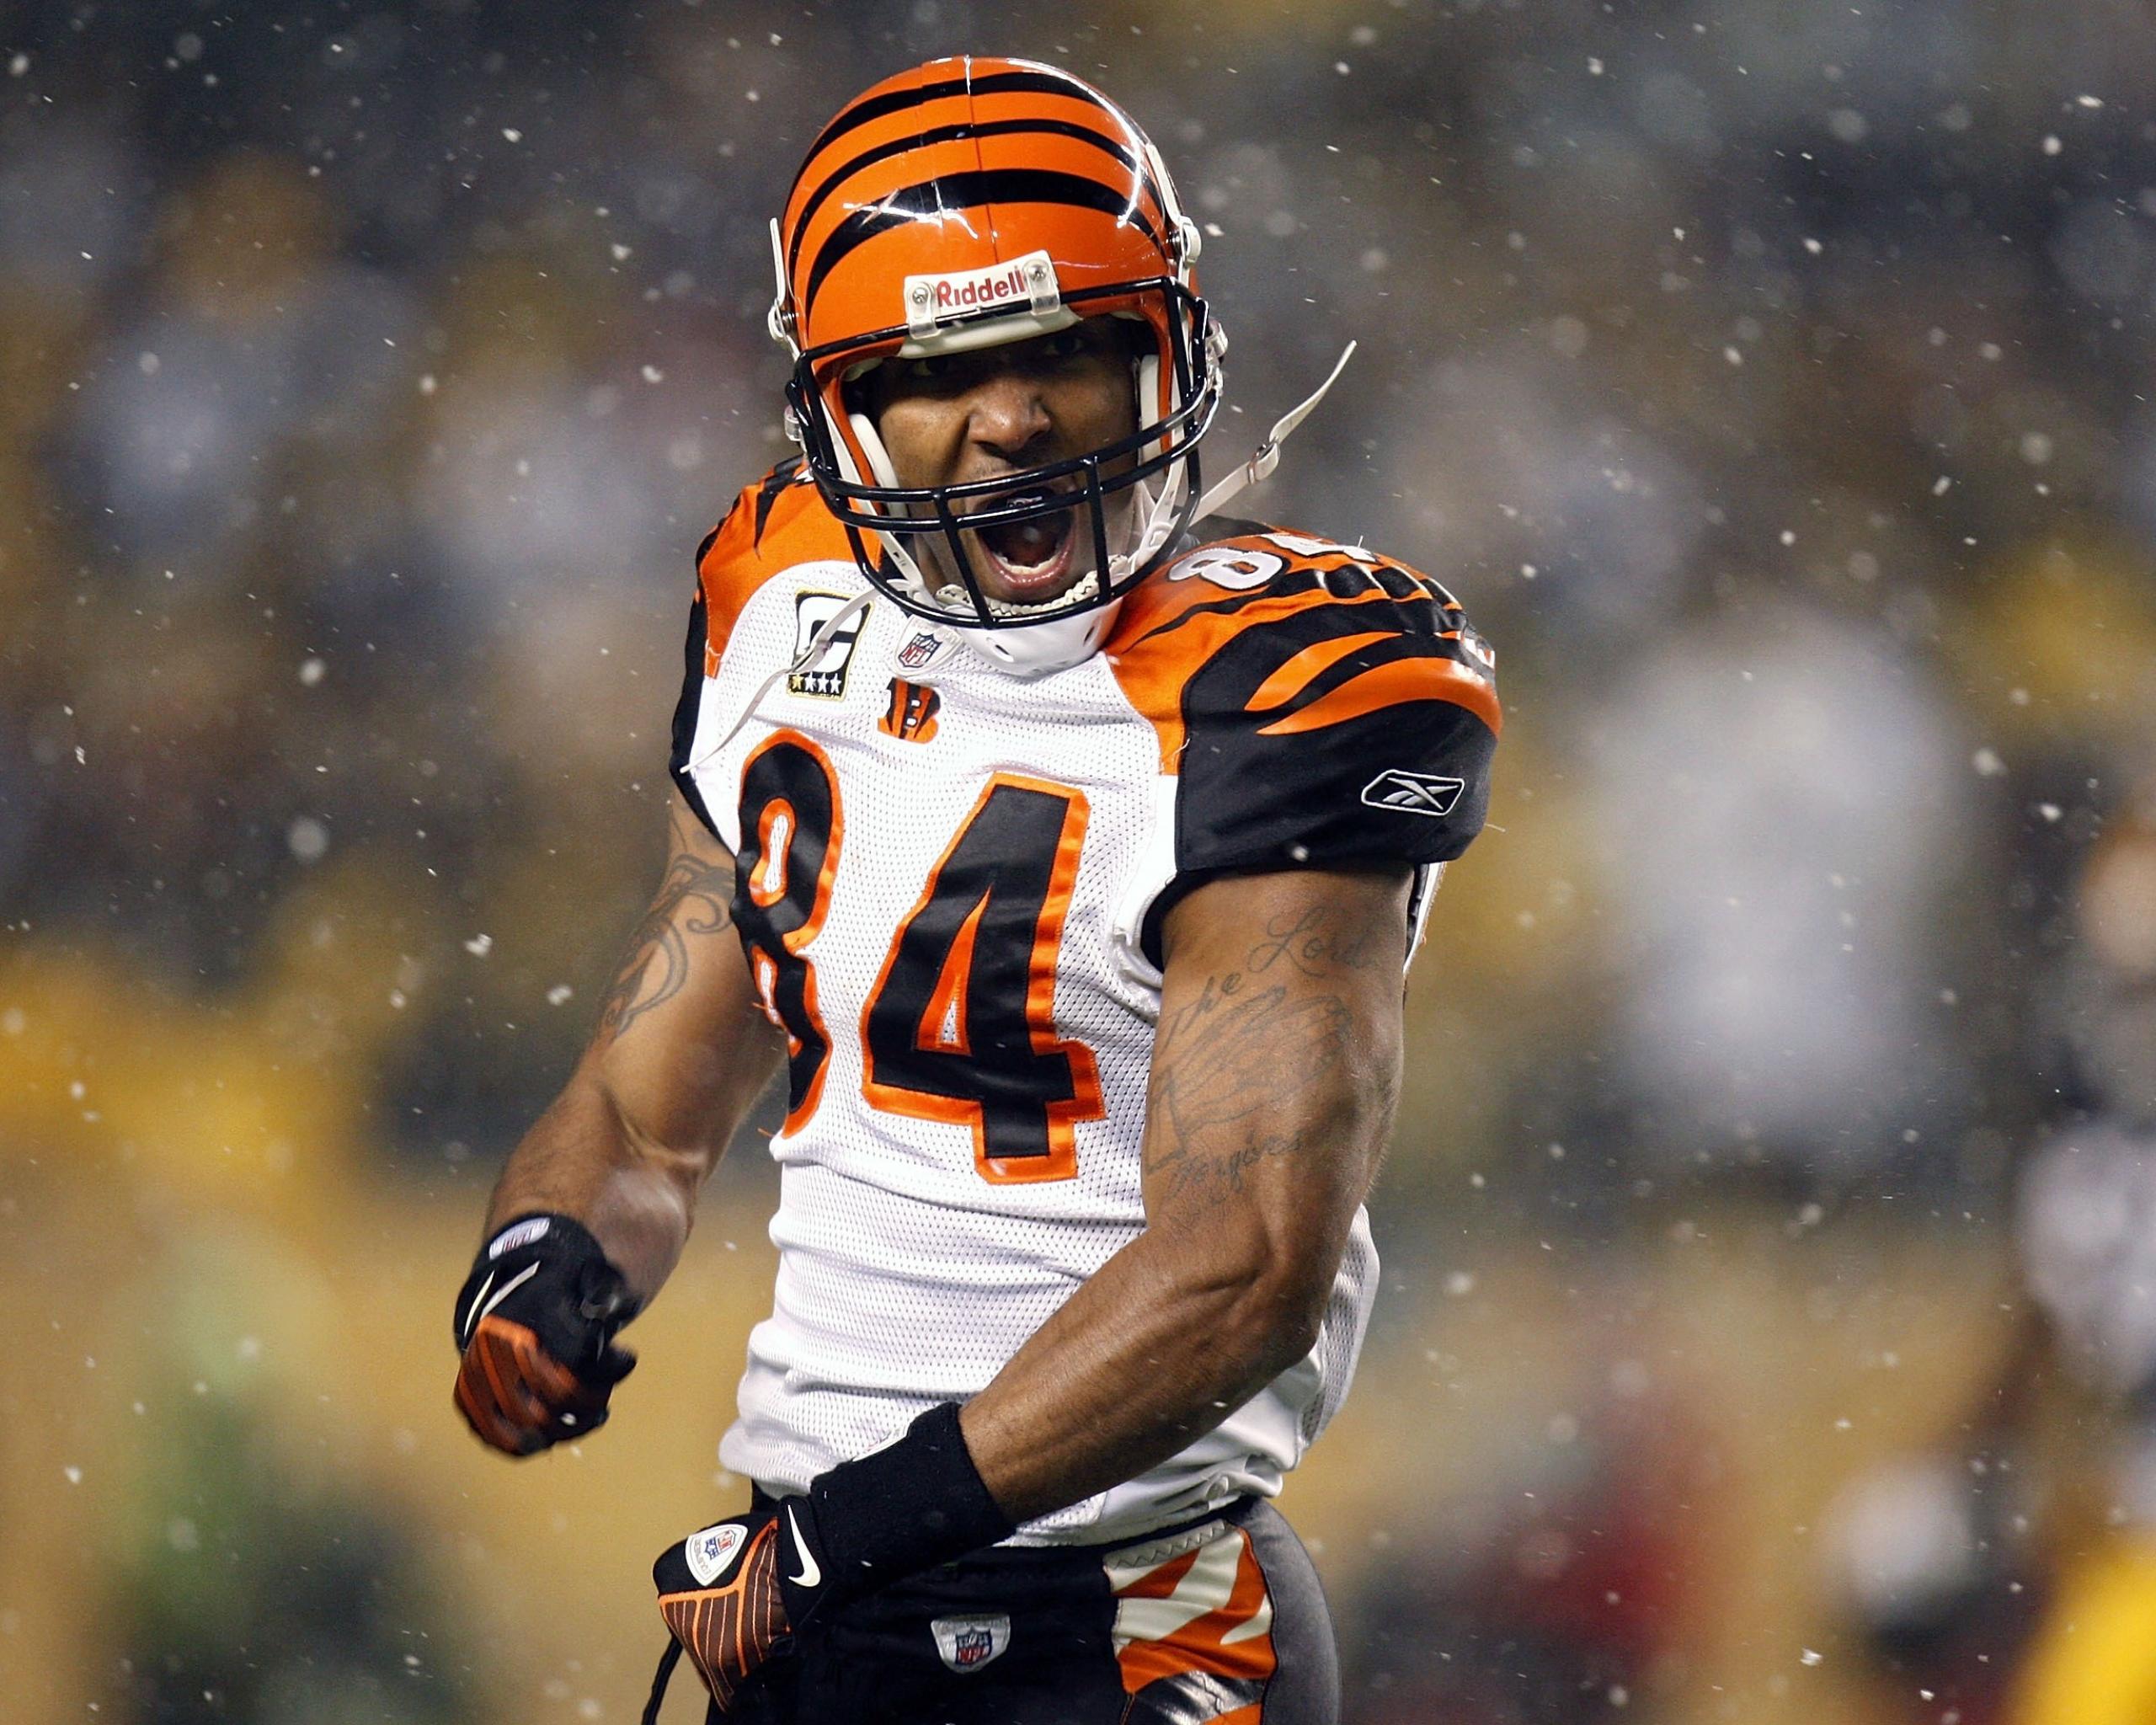 Wallpapers Football Nfl Player Tj From The Cincinnati Bengals ...